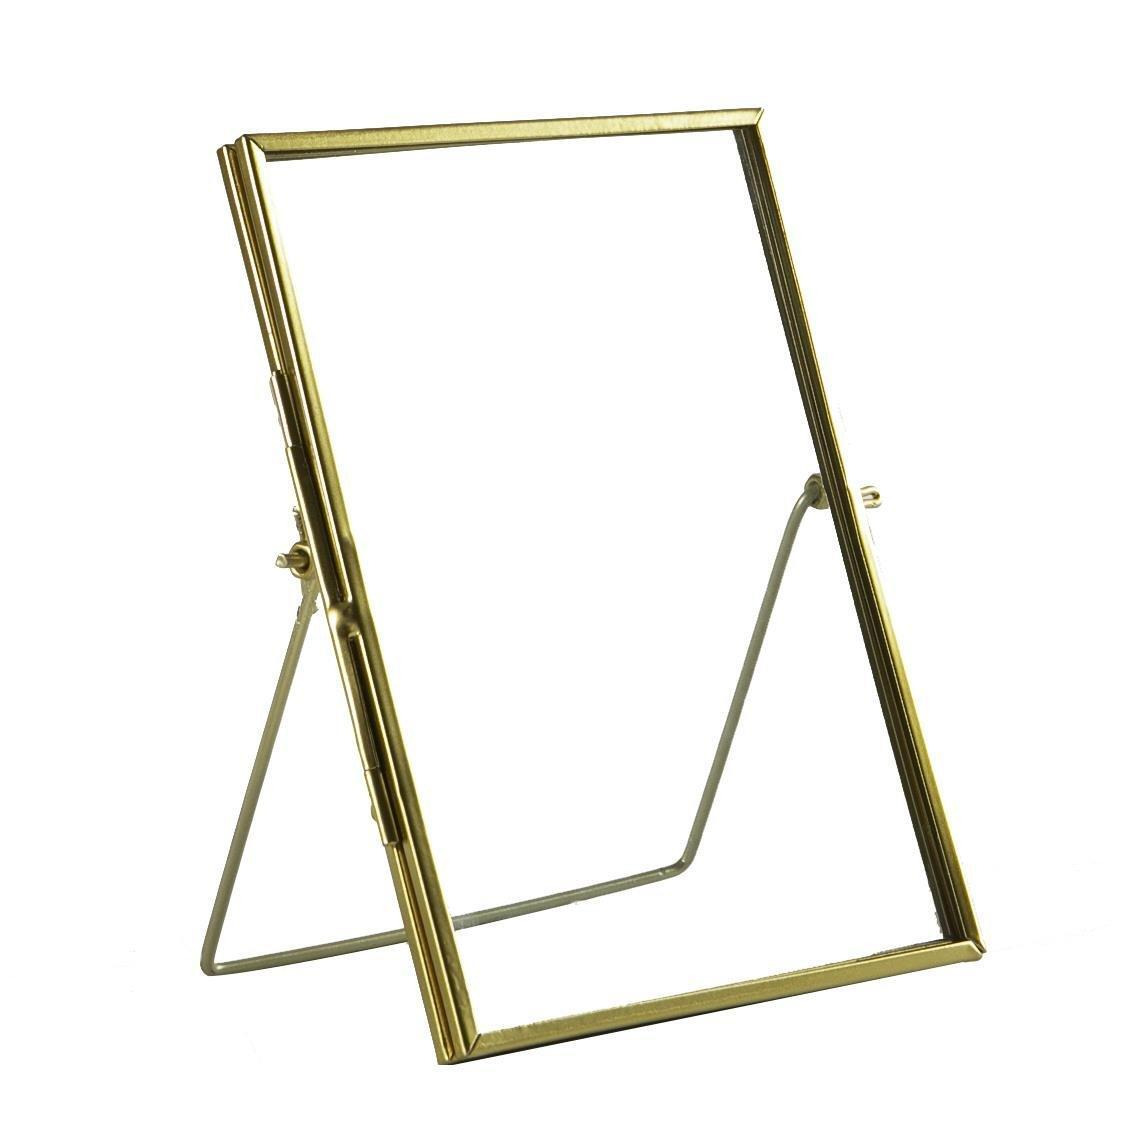 "Gold 5x7"" Standing Metal Photo Frame" - image 1